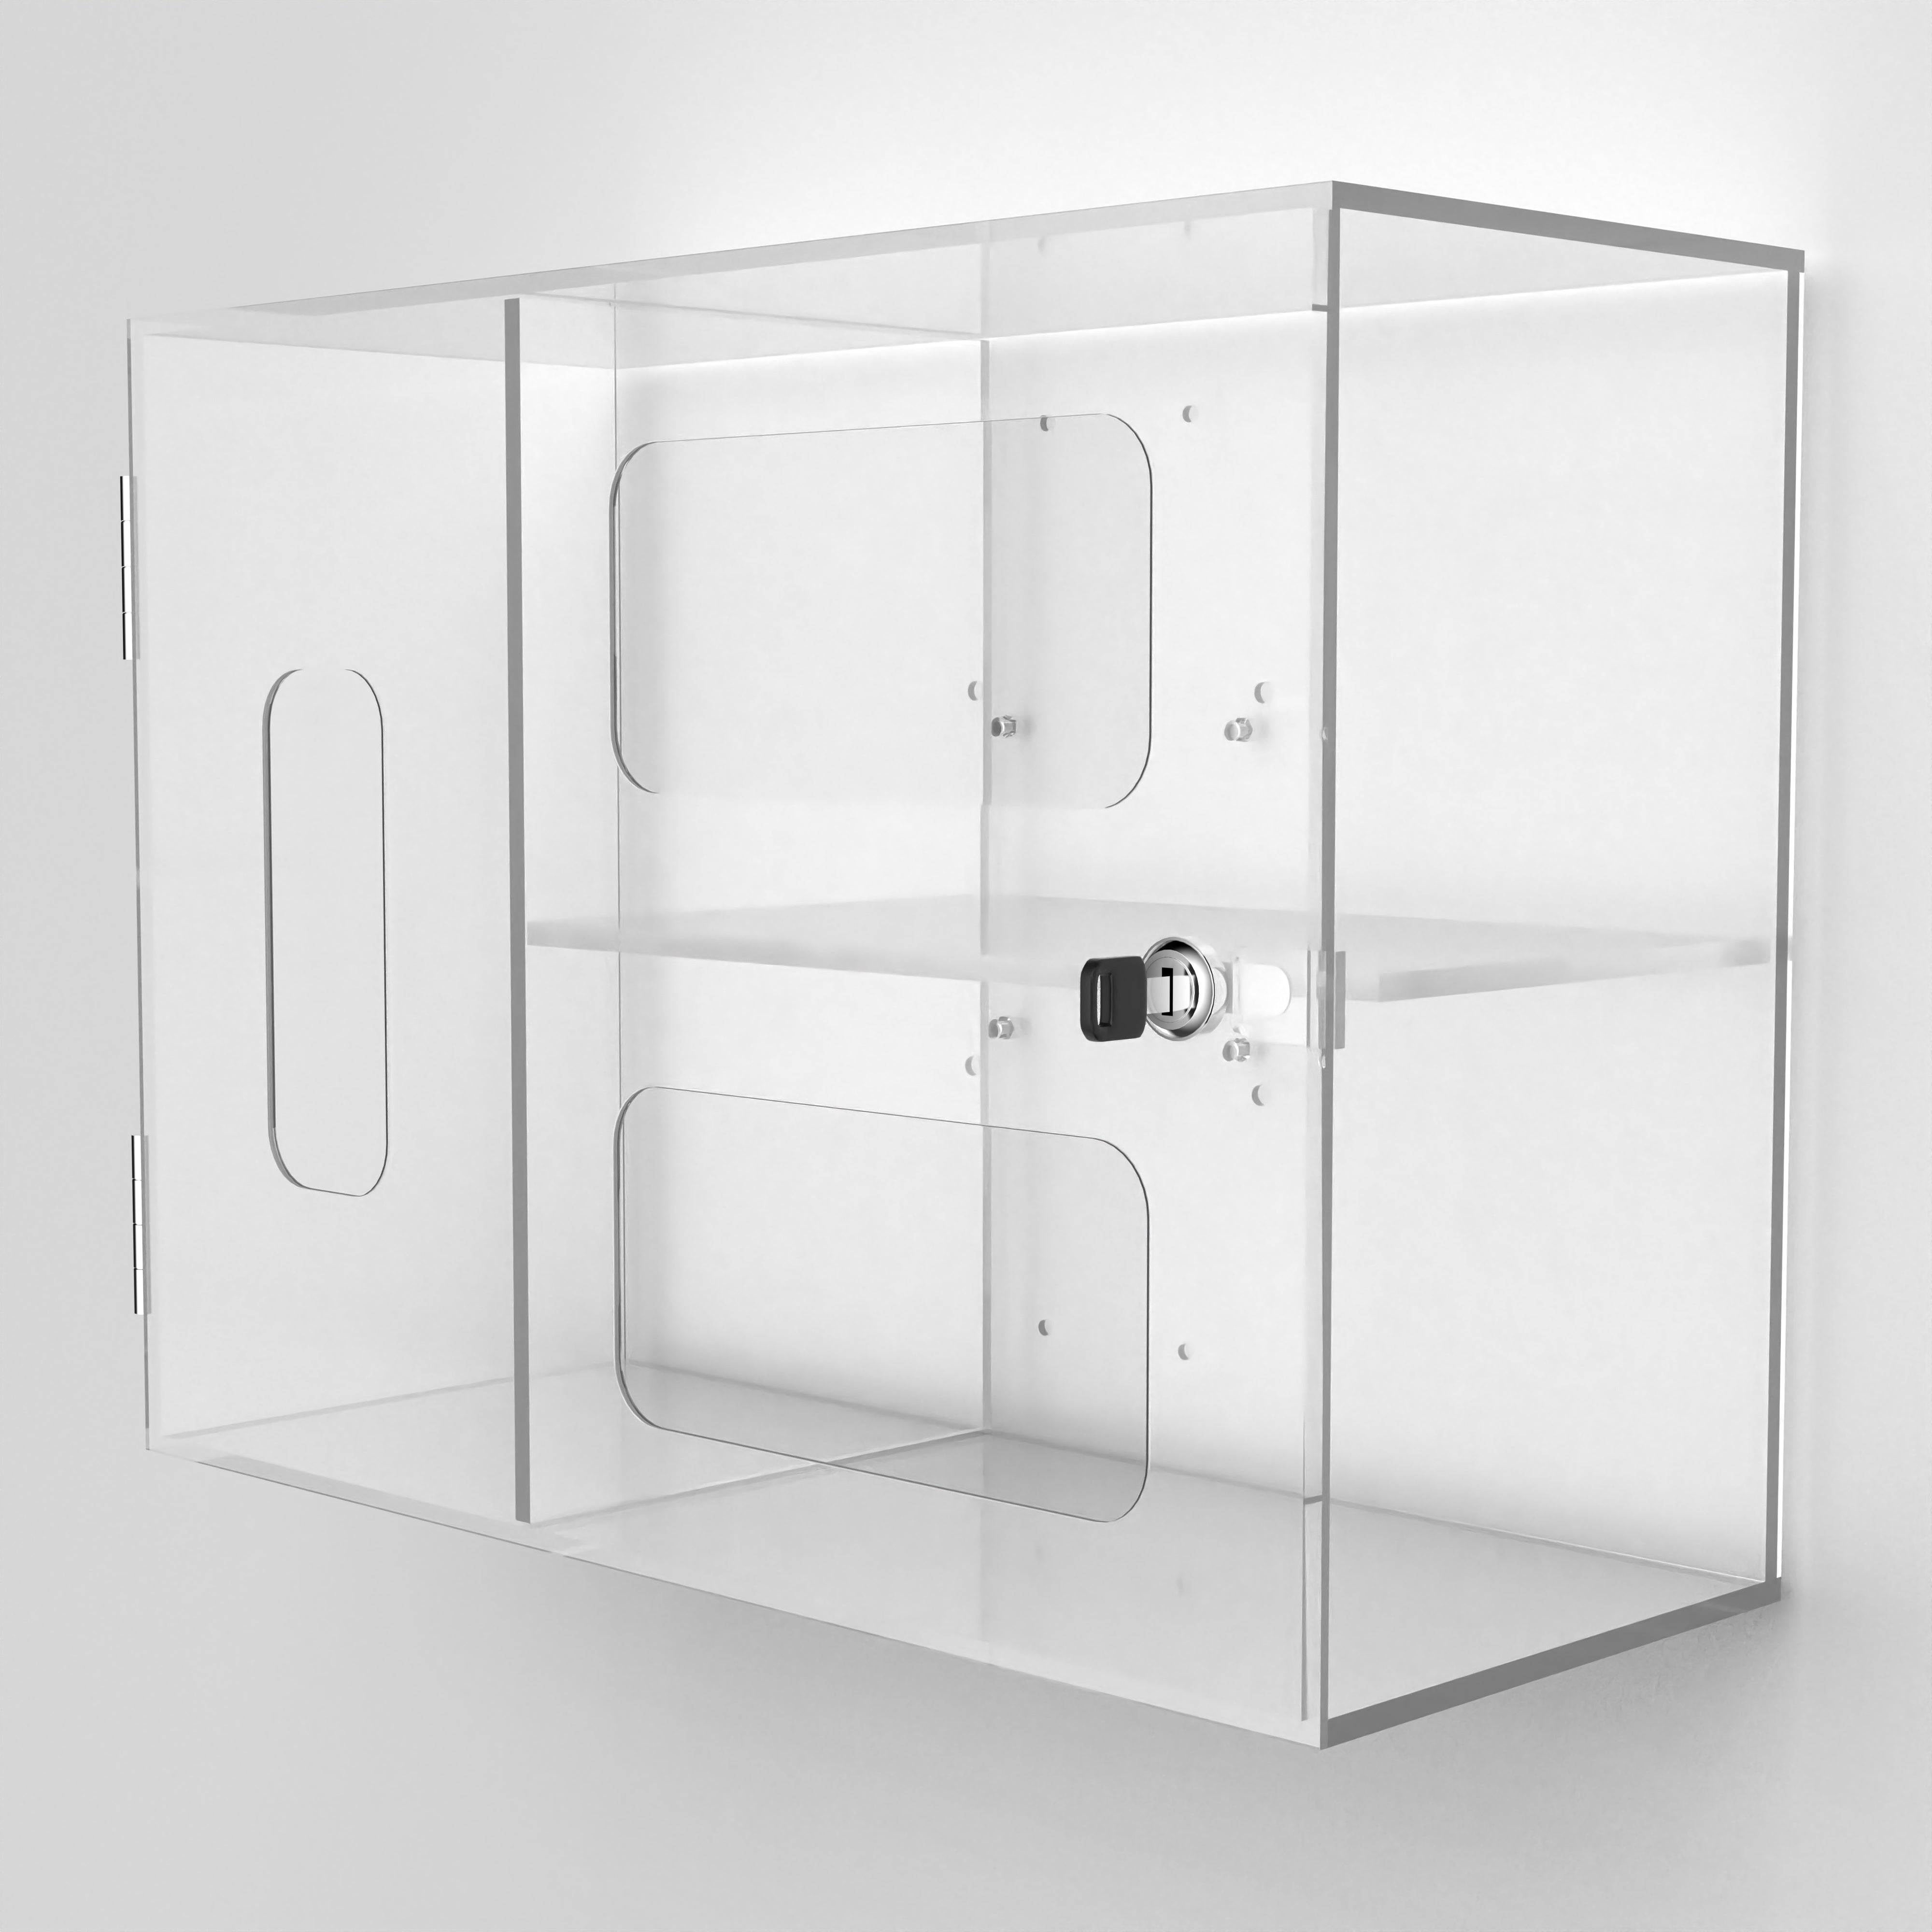 Security Box Acrylic Sanitizing Kit Compartment with VESA Compatibility for both Floor Stands and Wall Placement